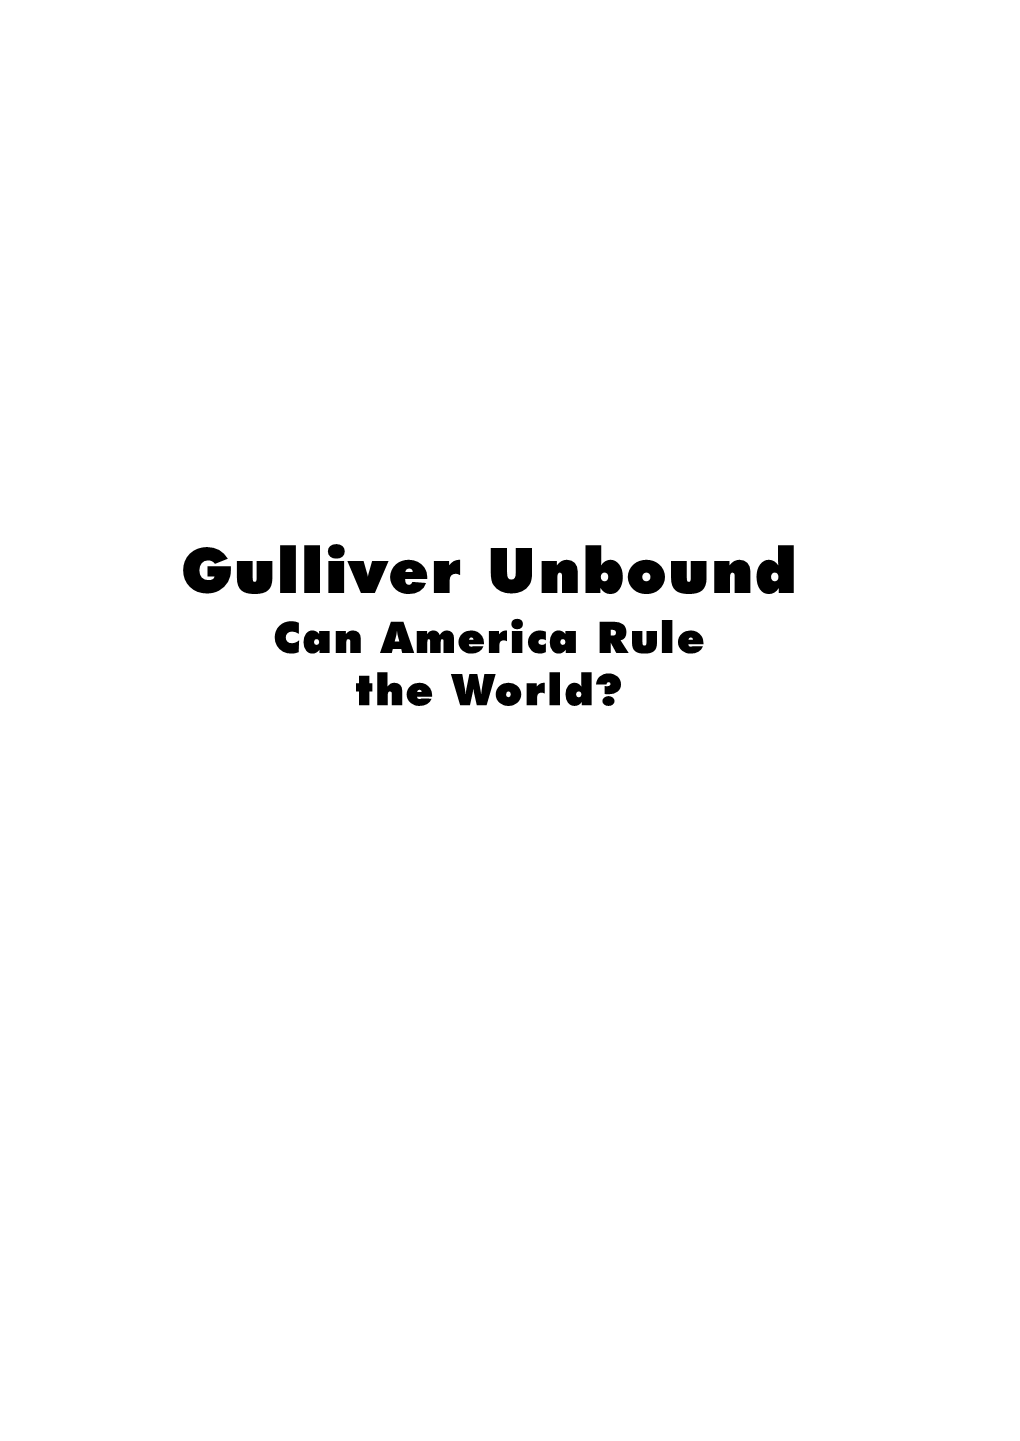 Gulliver Unbound Can America Rule the World? Gulliver Unbound Can America Rule the World?